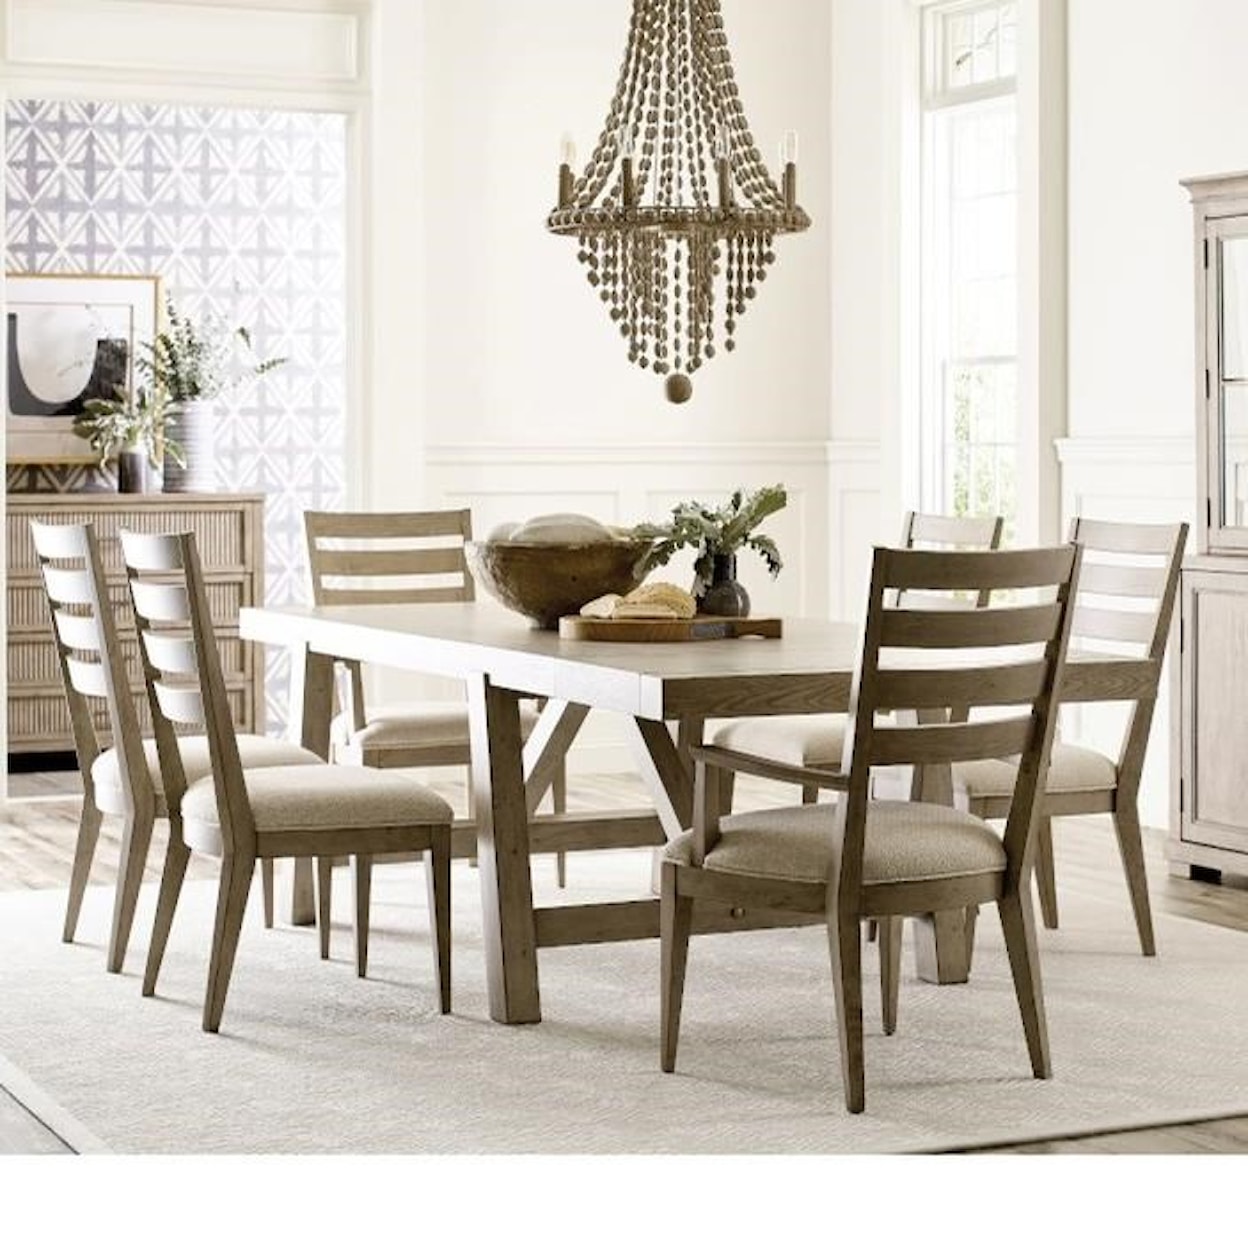 American Drew West Fork 7-Piece Table and Chair Set